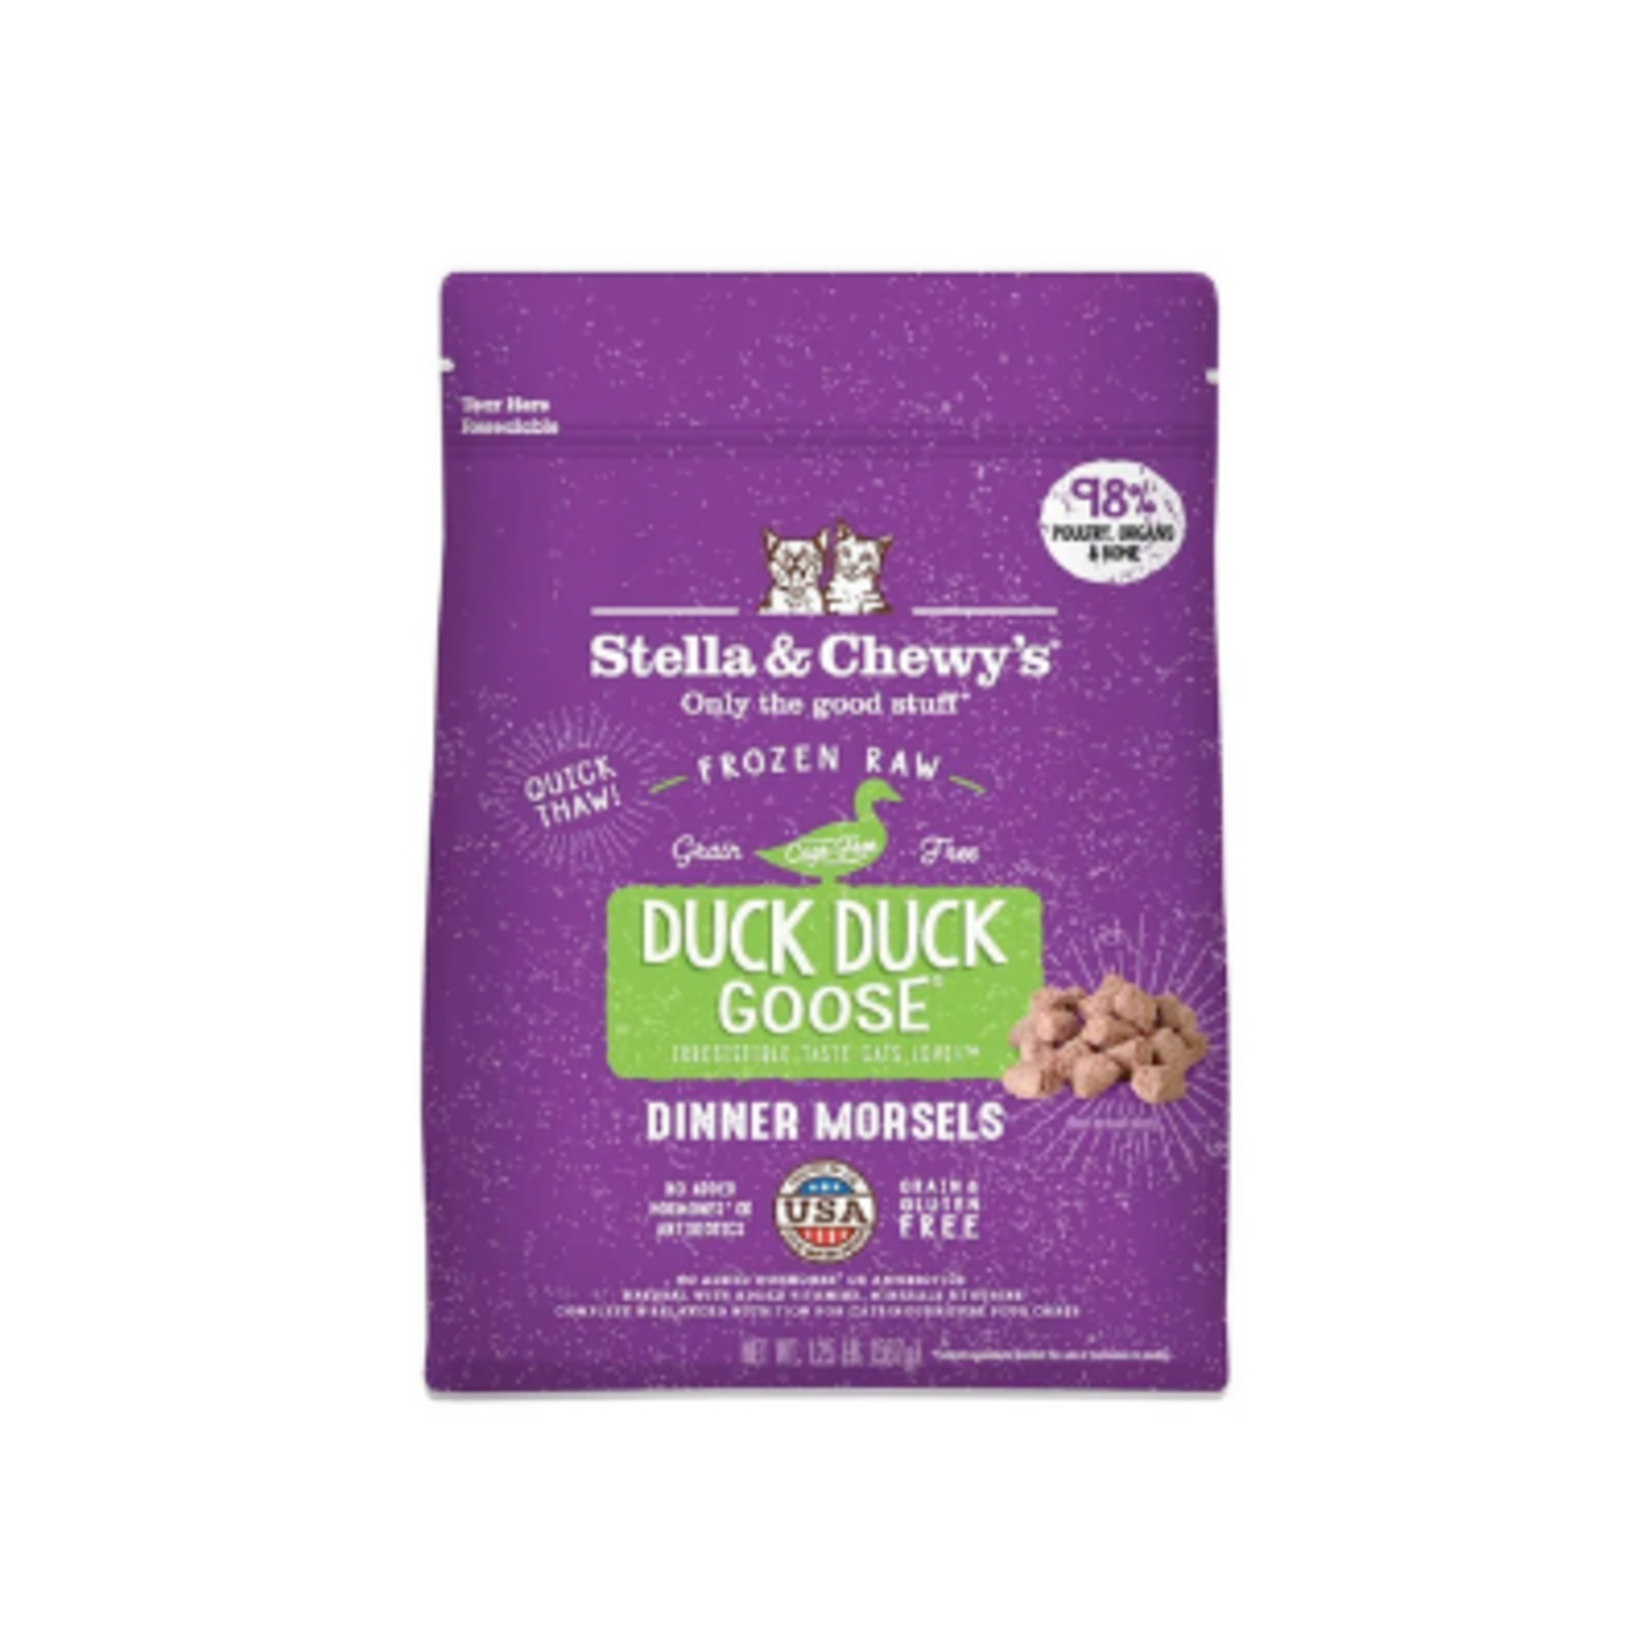 Stella & Chewy's 1.25# - Duck Duck Goose - Raw Frozen Dinner Morsels - Stella & Chewy's - cat